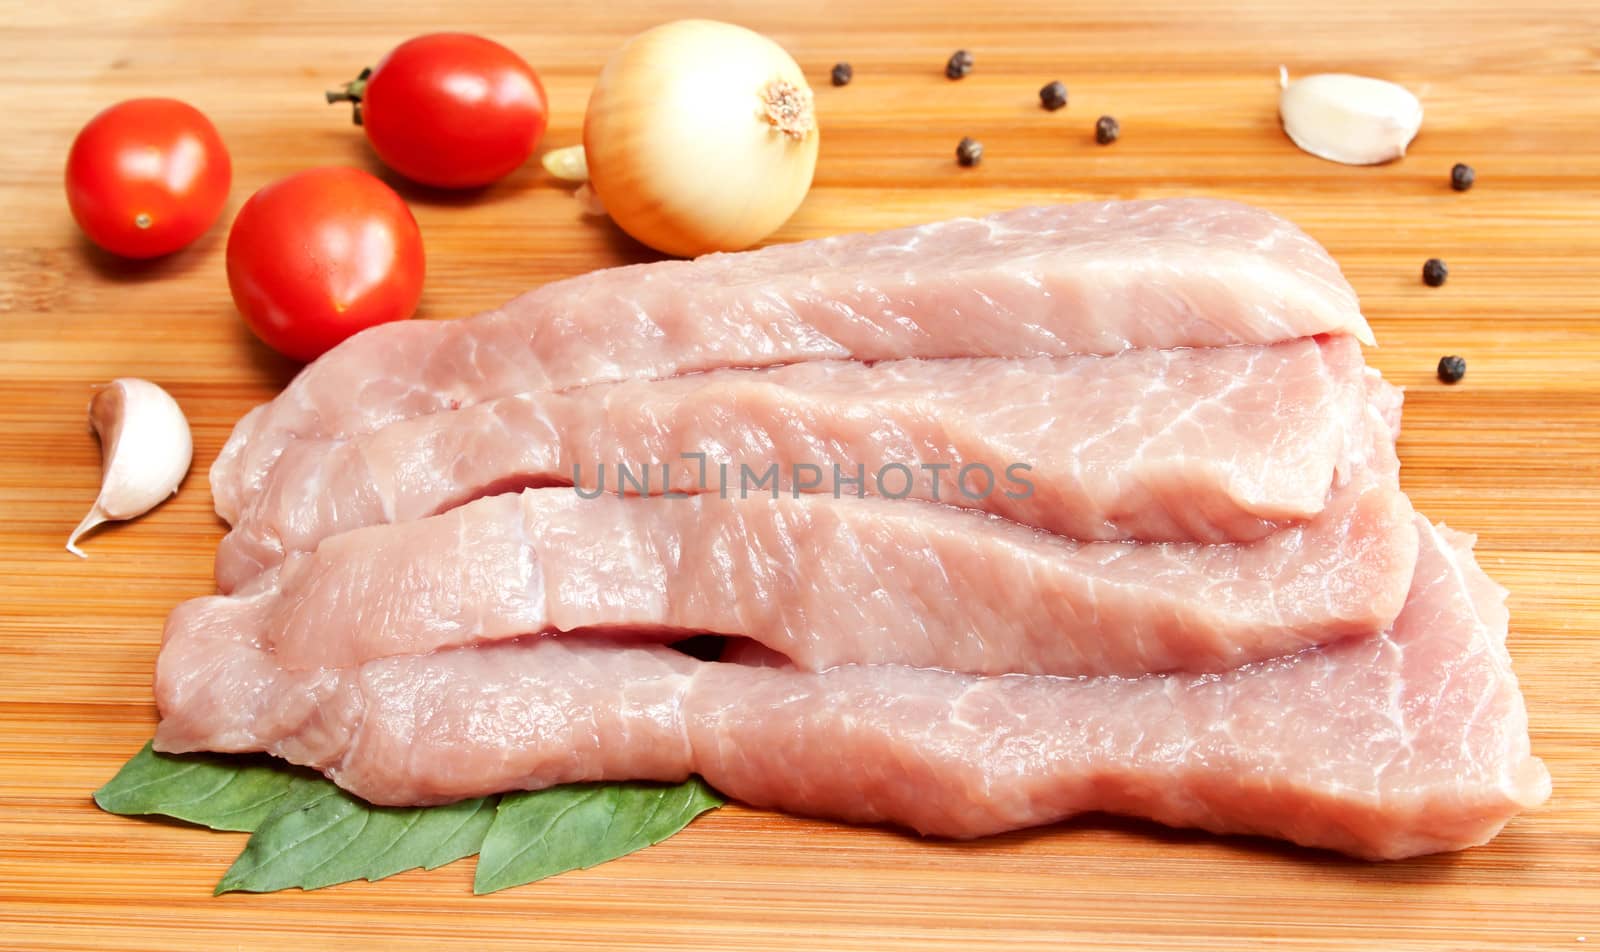 Raw pork with spices and vegetables by evp82